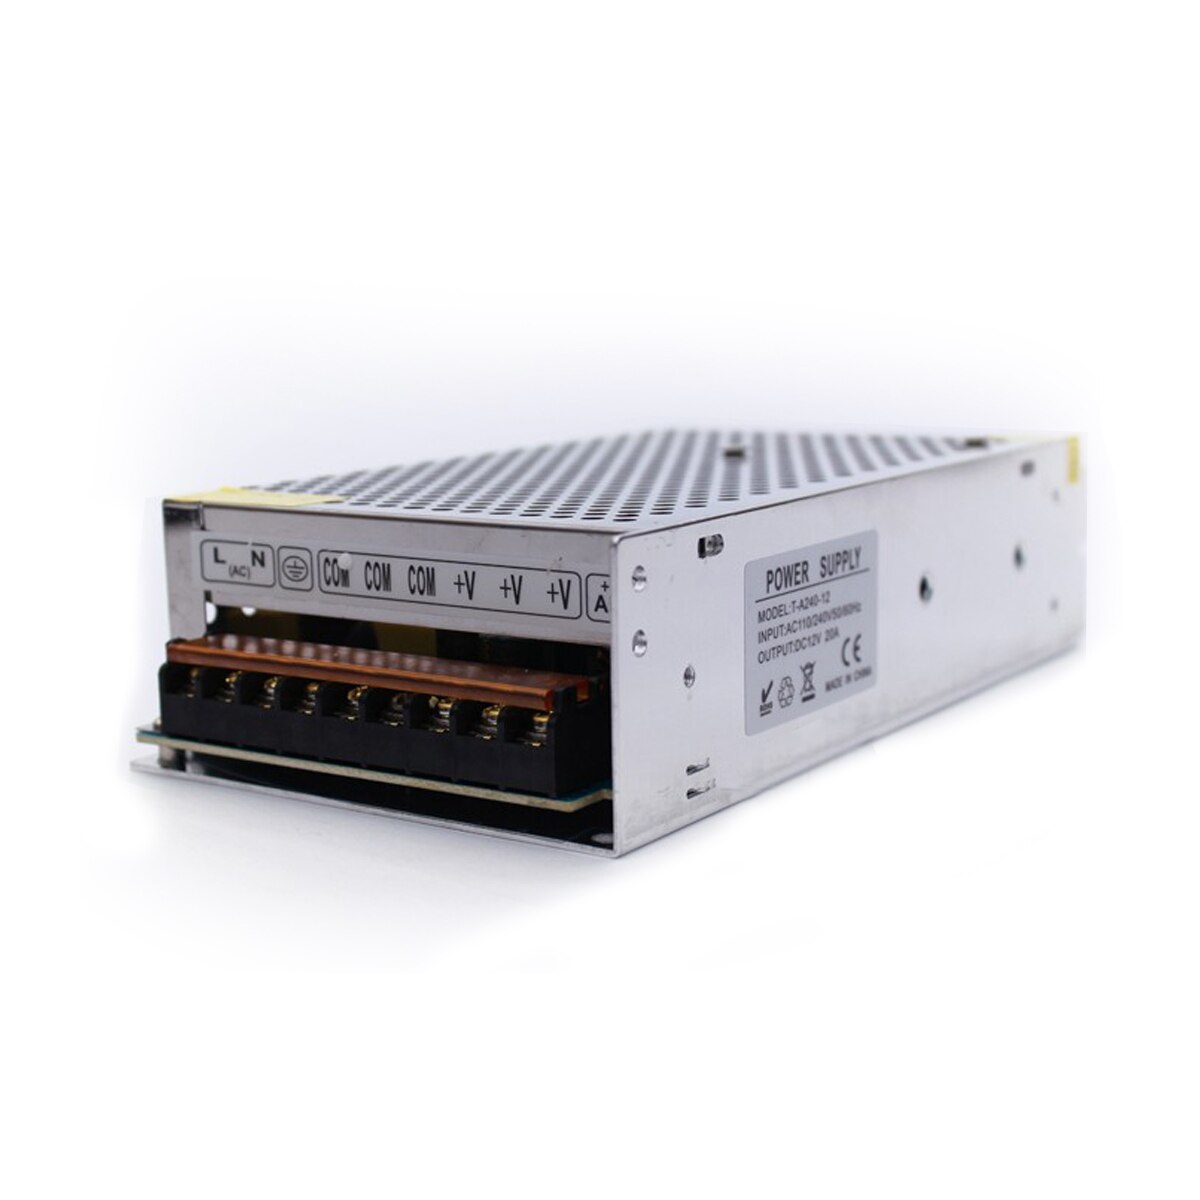 Besder 12V 20A 240W Switch Switching Power Supply Voor Cctv Camera Voor Security System 110-240V